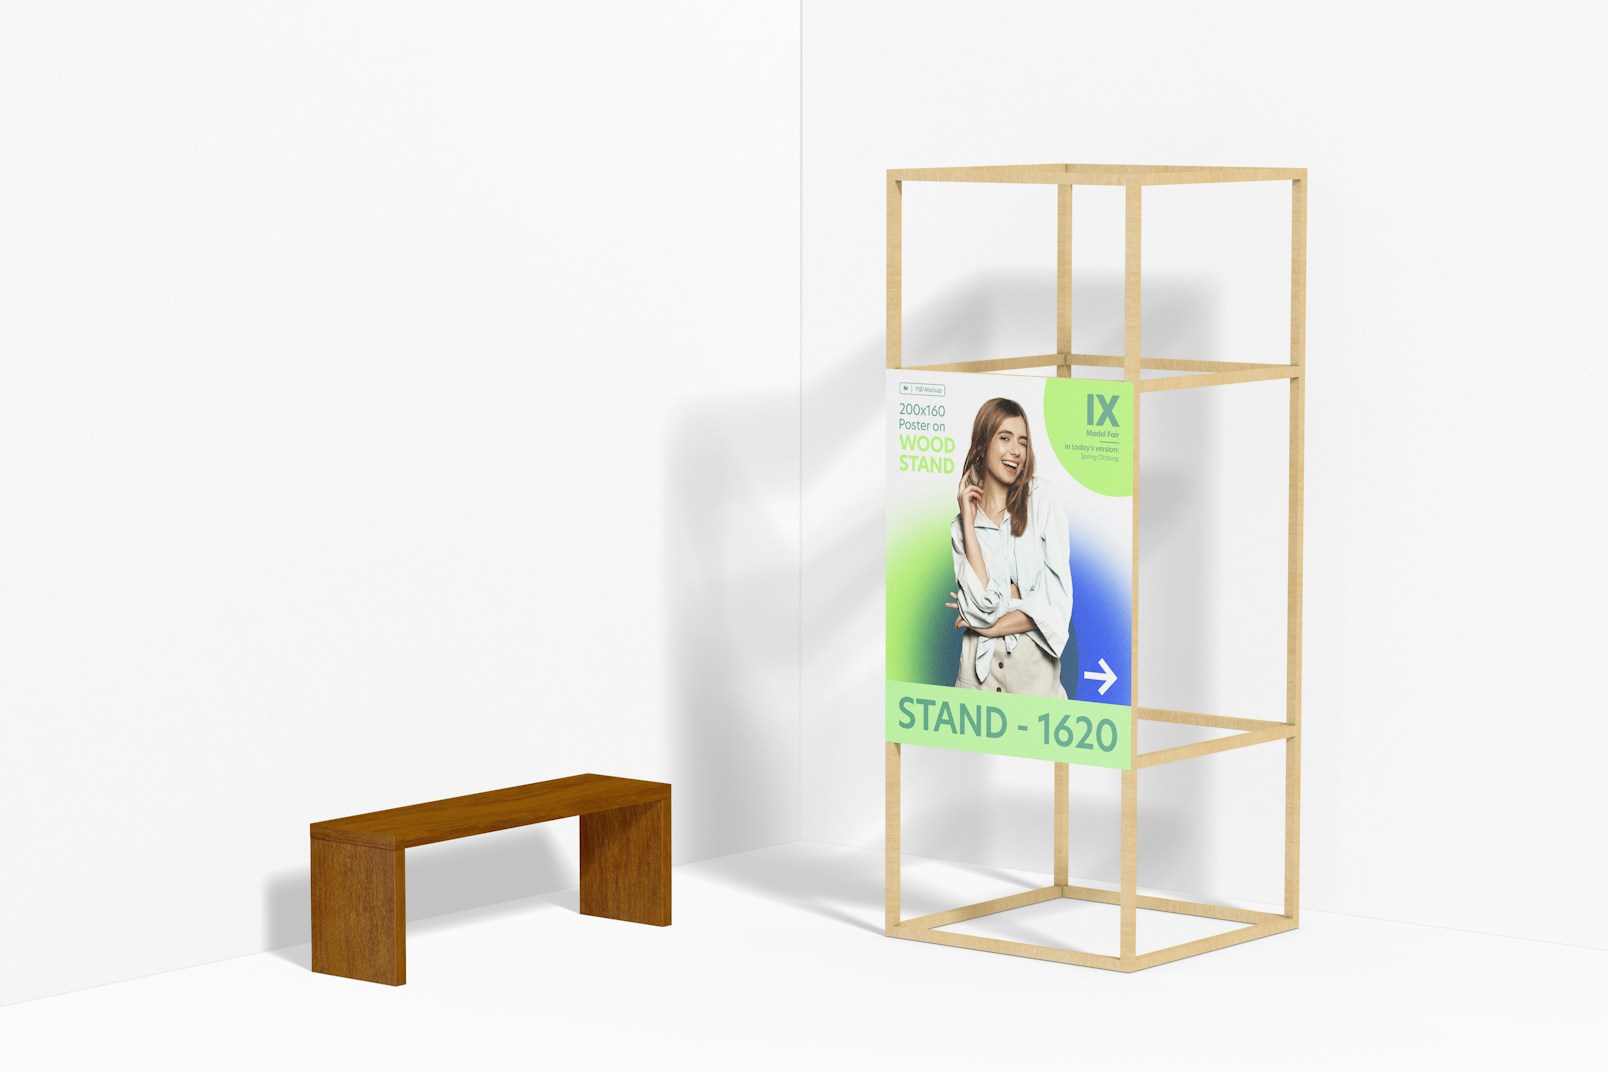 200x160 Poster on Wood Stand Mockup, Perspective